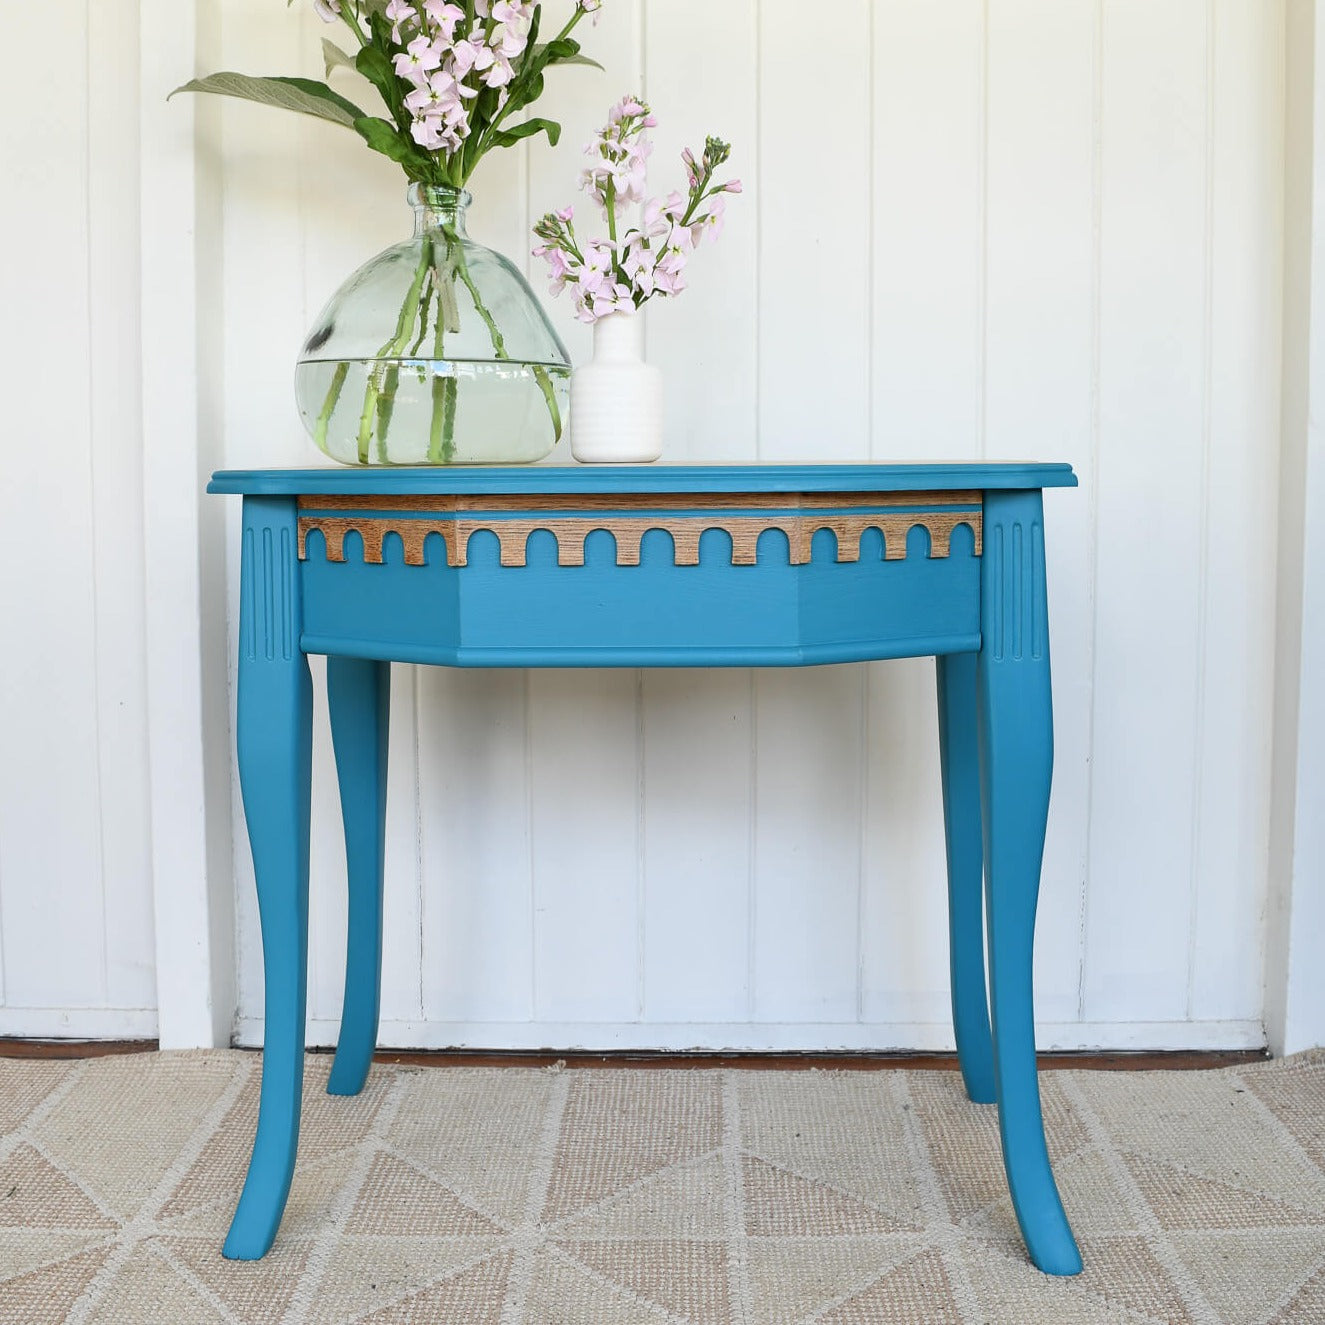 Small vintage table painted with Blake & Taylor Marine Chalk Furniture Paint